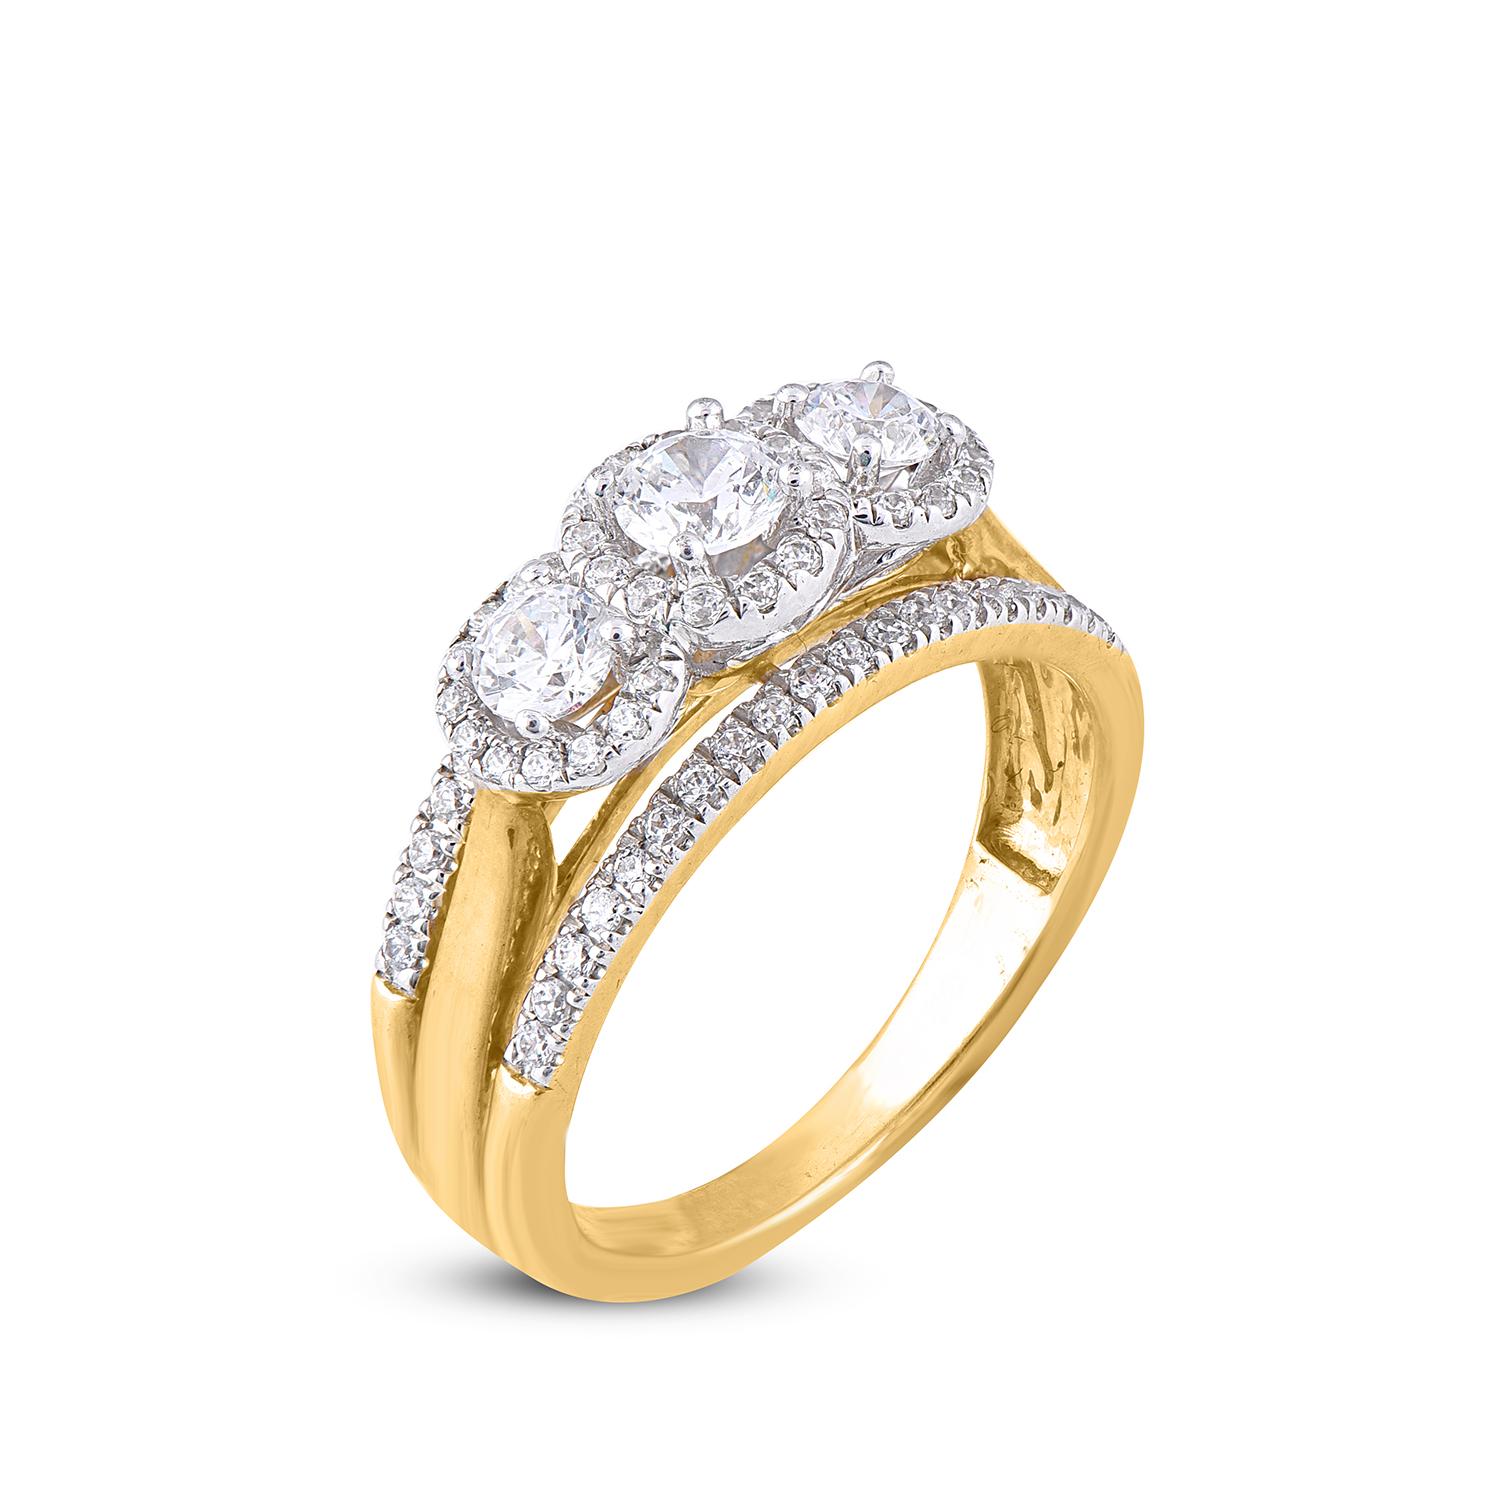 This dazzling design features 74 diamonds 0.246ct of centre stone and each side diamond is 0.17 ct and remaining diamond on frame and shank lined diamonds secured in prong setting crafted in 18 karat Yellow gold. Diamonds are graded G-H Color, SI1-2